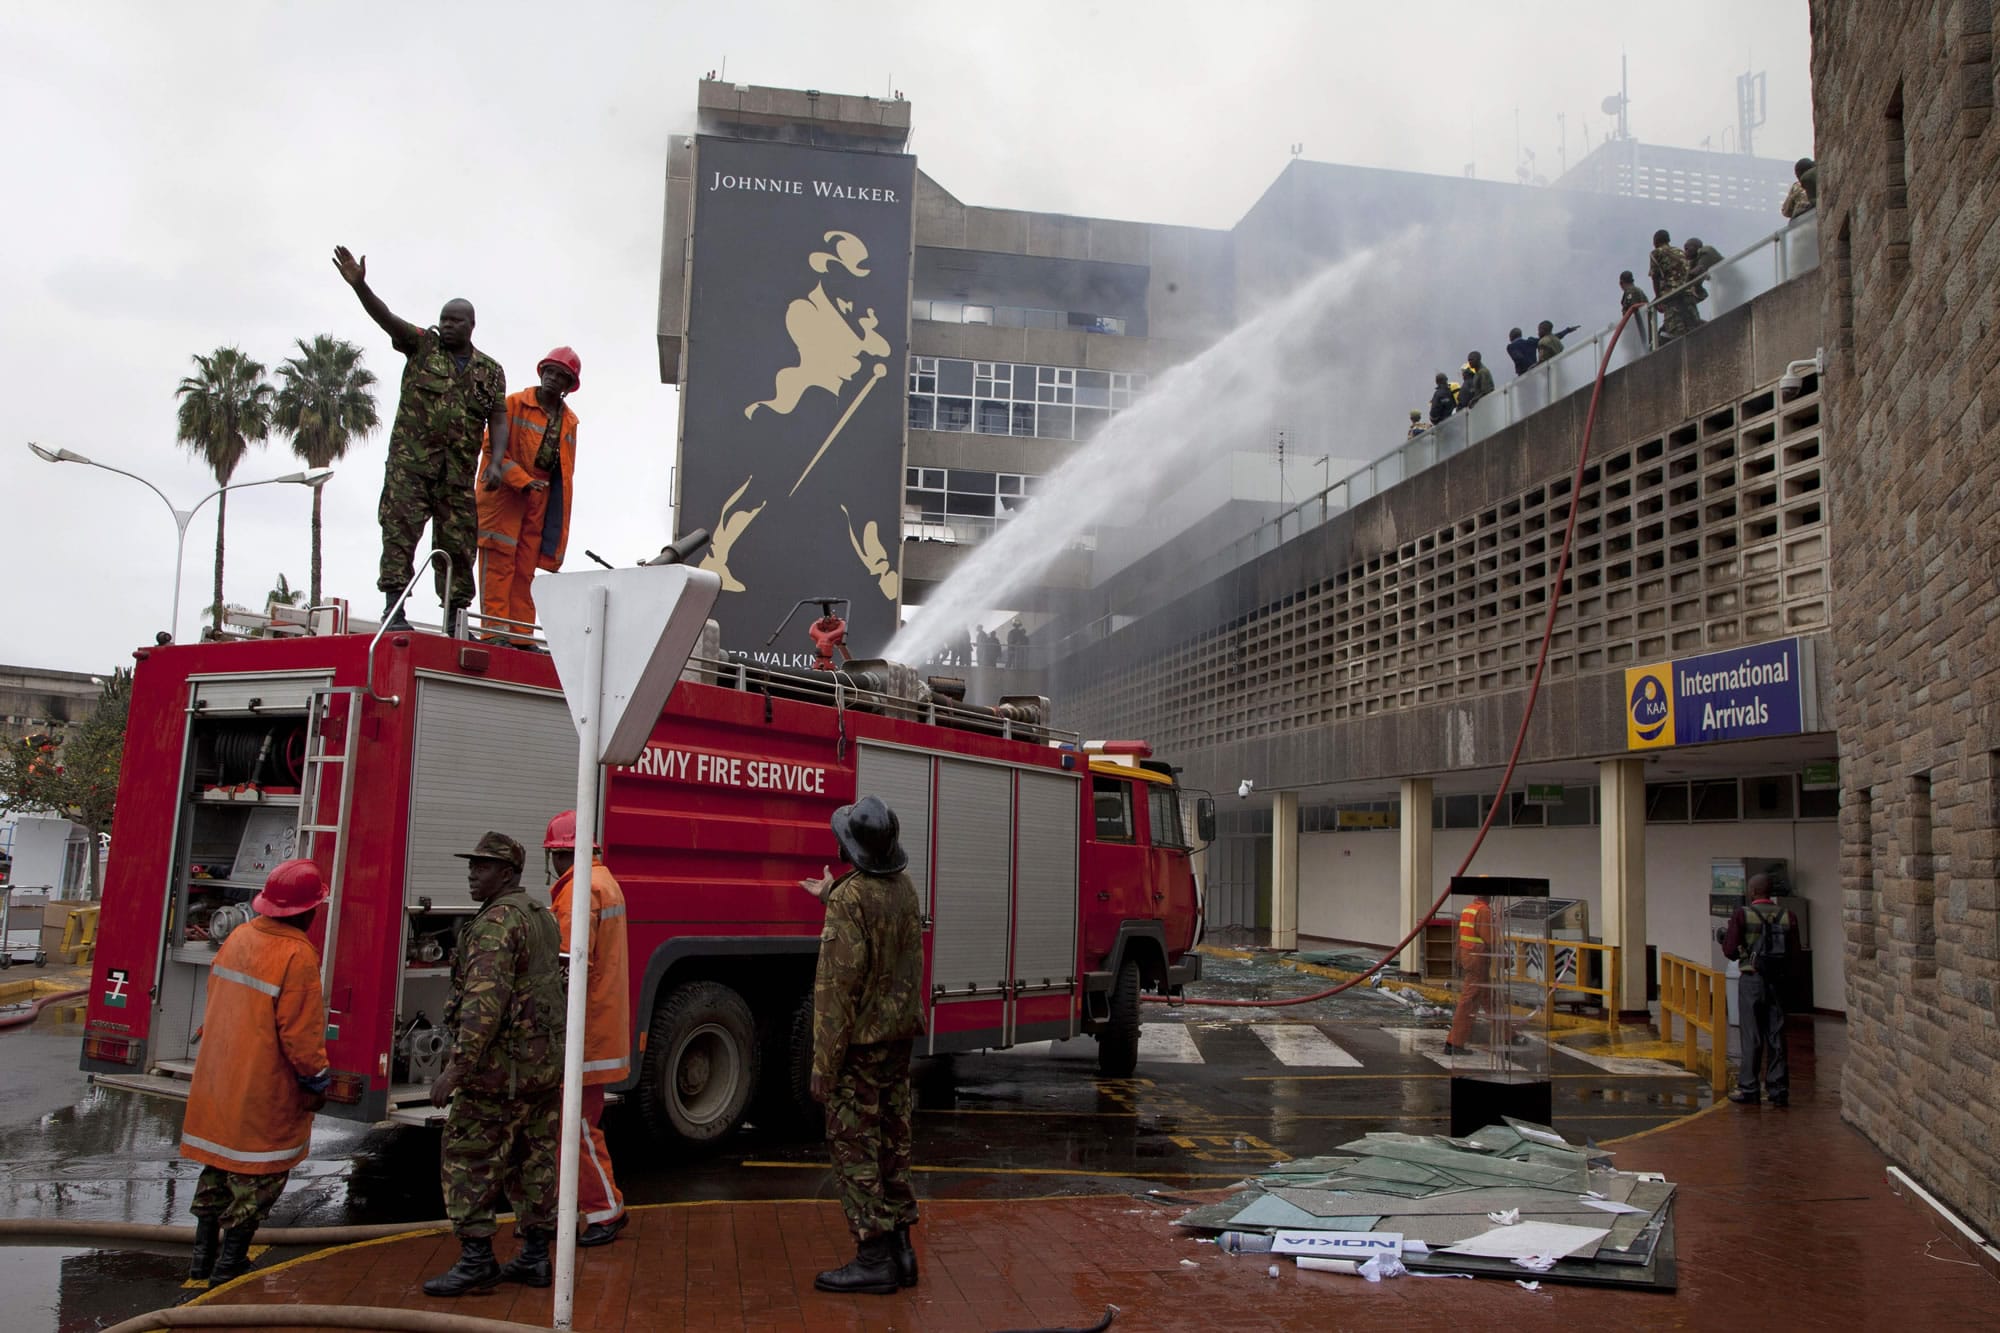 Firefighters put out the fire which gutted the International arrivals area of Jomo Kenyatta International Airport Nairobi, Kenya, on Aug.